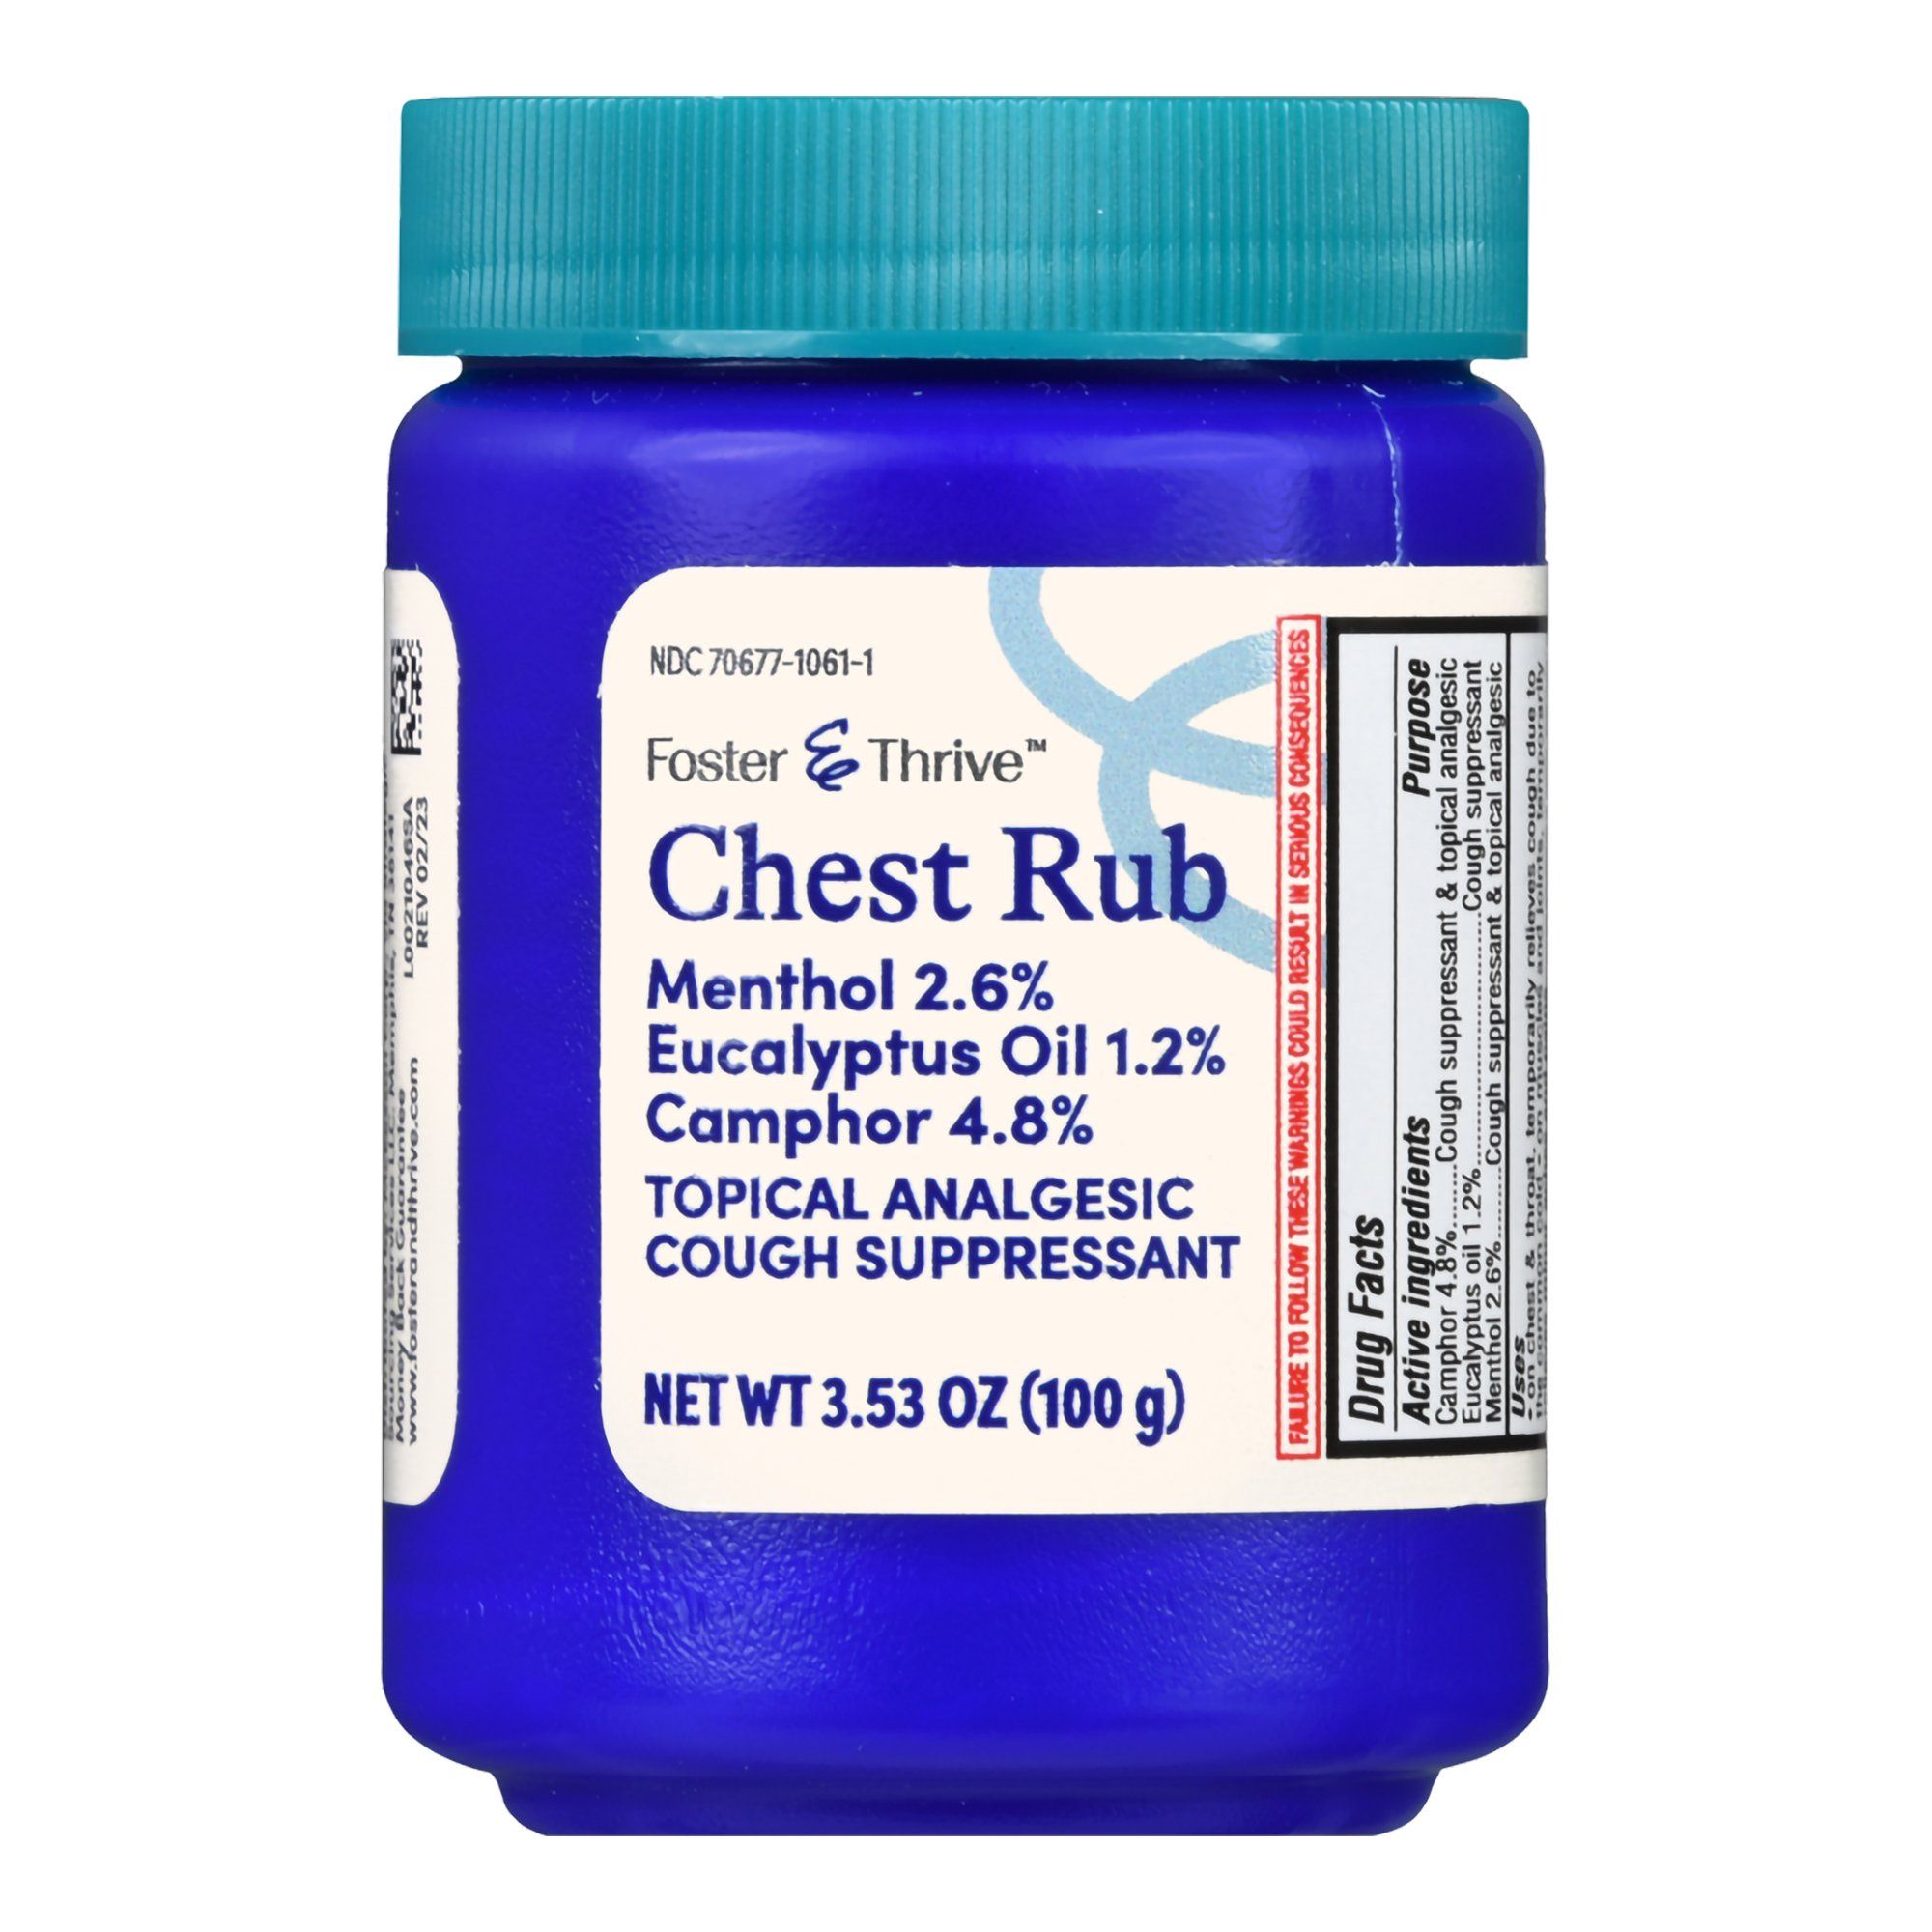 Foster & Thrive Topical Analgesic, Cough Suppressant Chest Rub - 3.53 oz